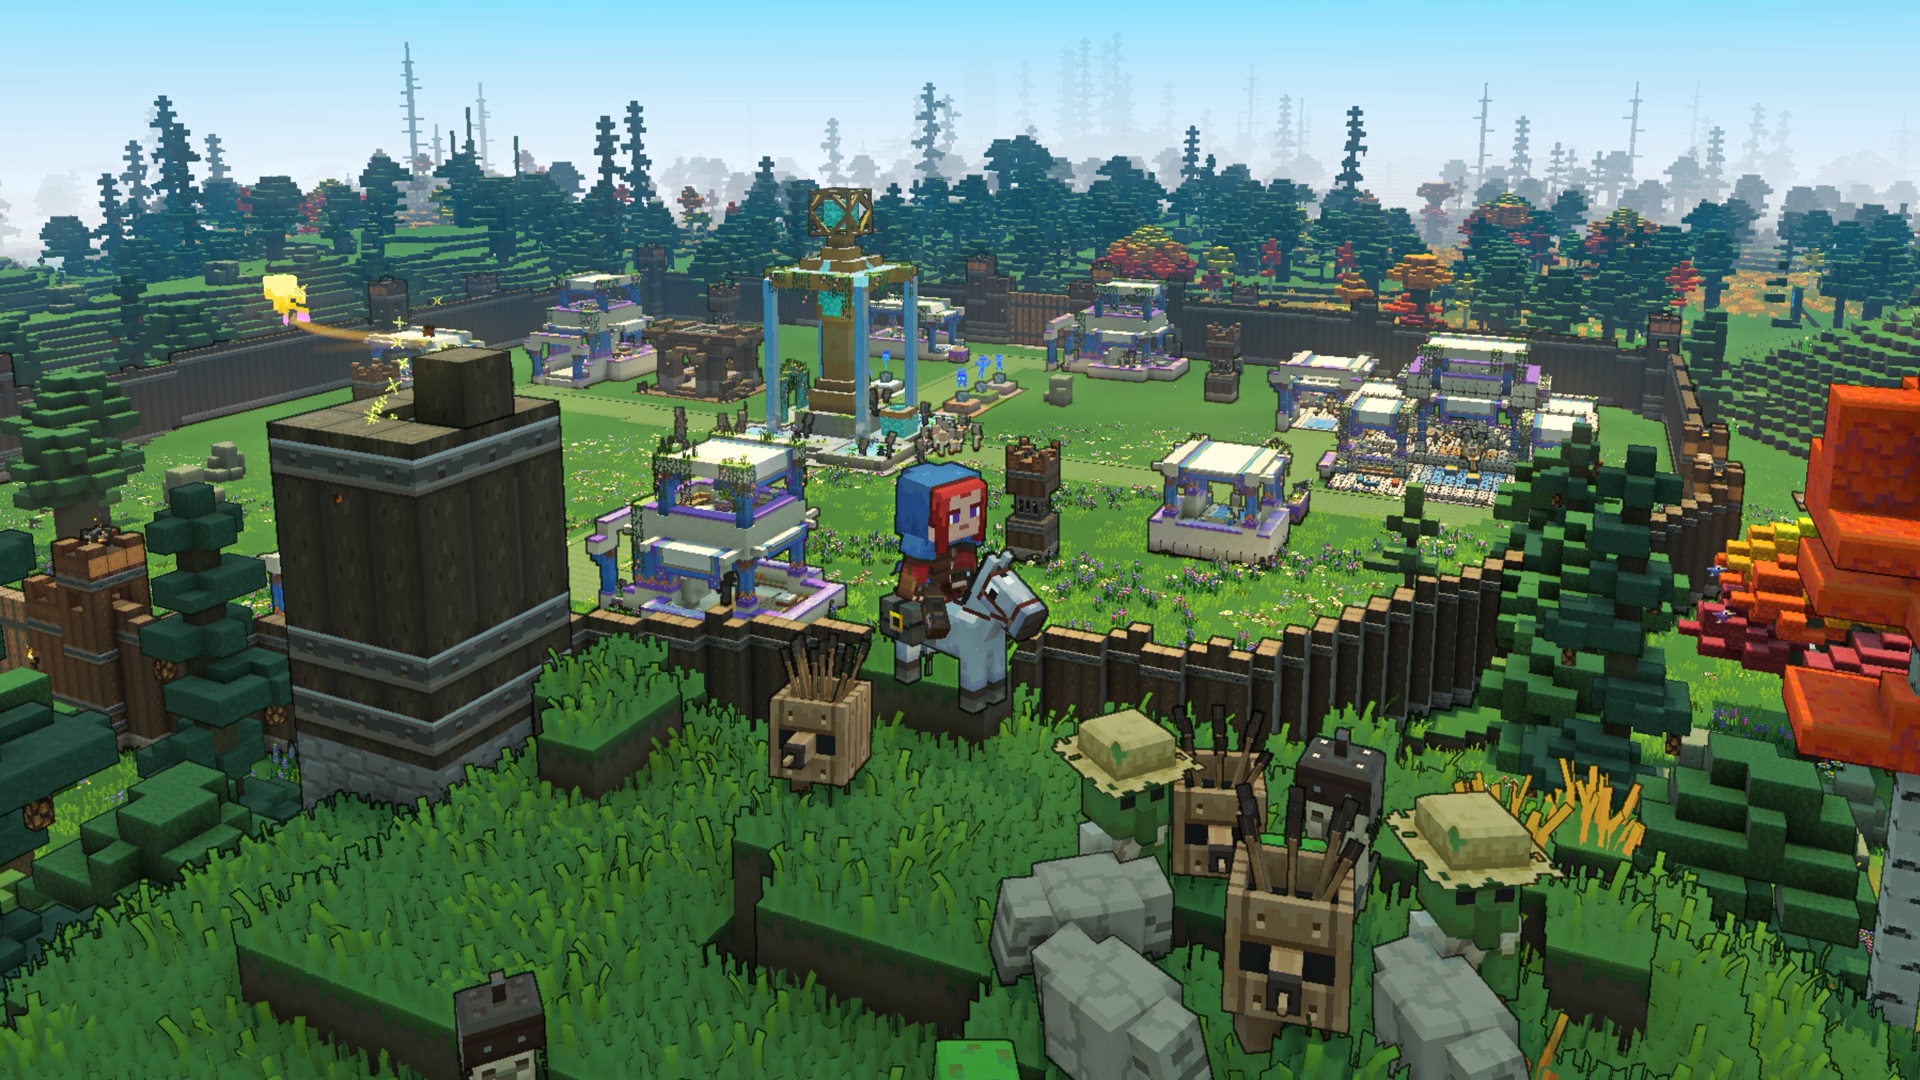 Minecraft Legends player on a mountain stands on a grassy knoll overlooking a base with wooden walls and various structures inside.